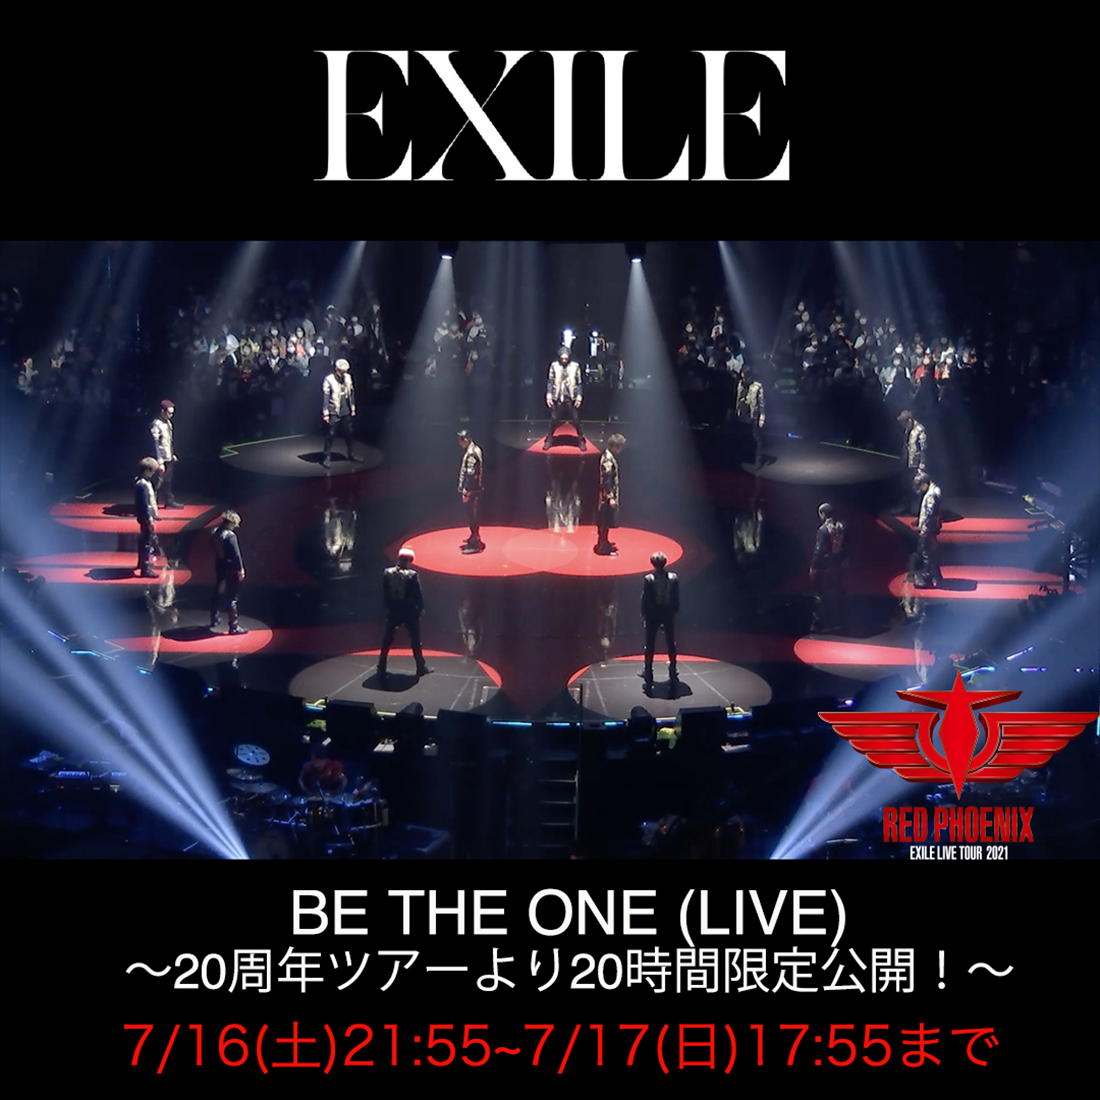 EXILE、20周年ツアーより新曲「BE THE ONE」のライブ映像を20時間限定公開 - 画像一覧（1/1）